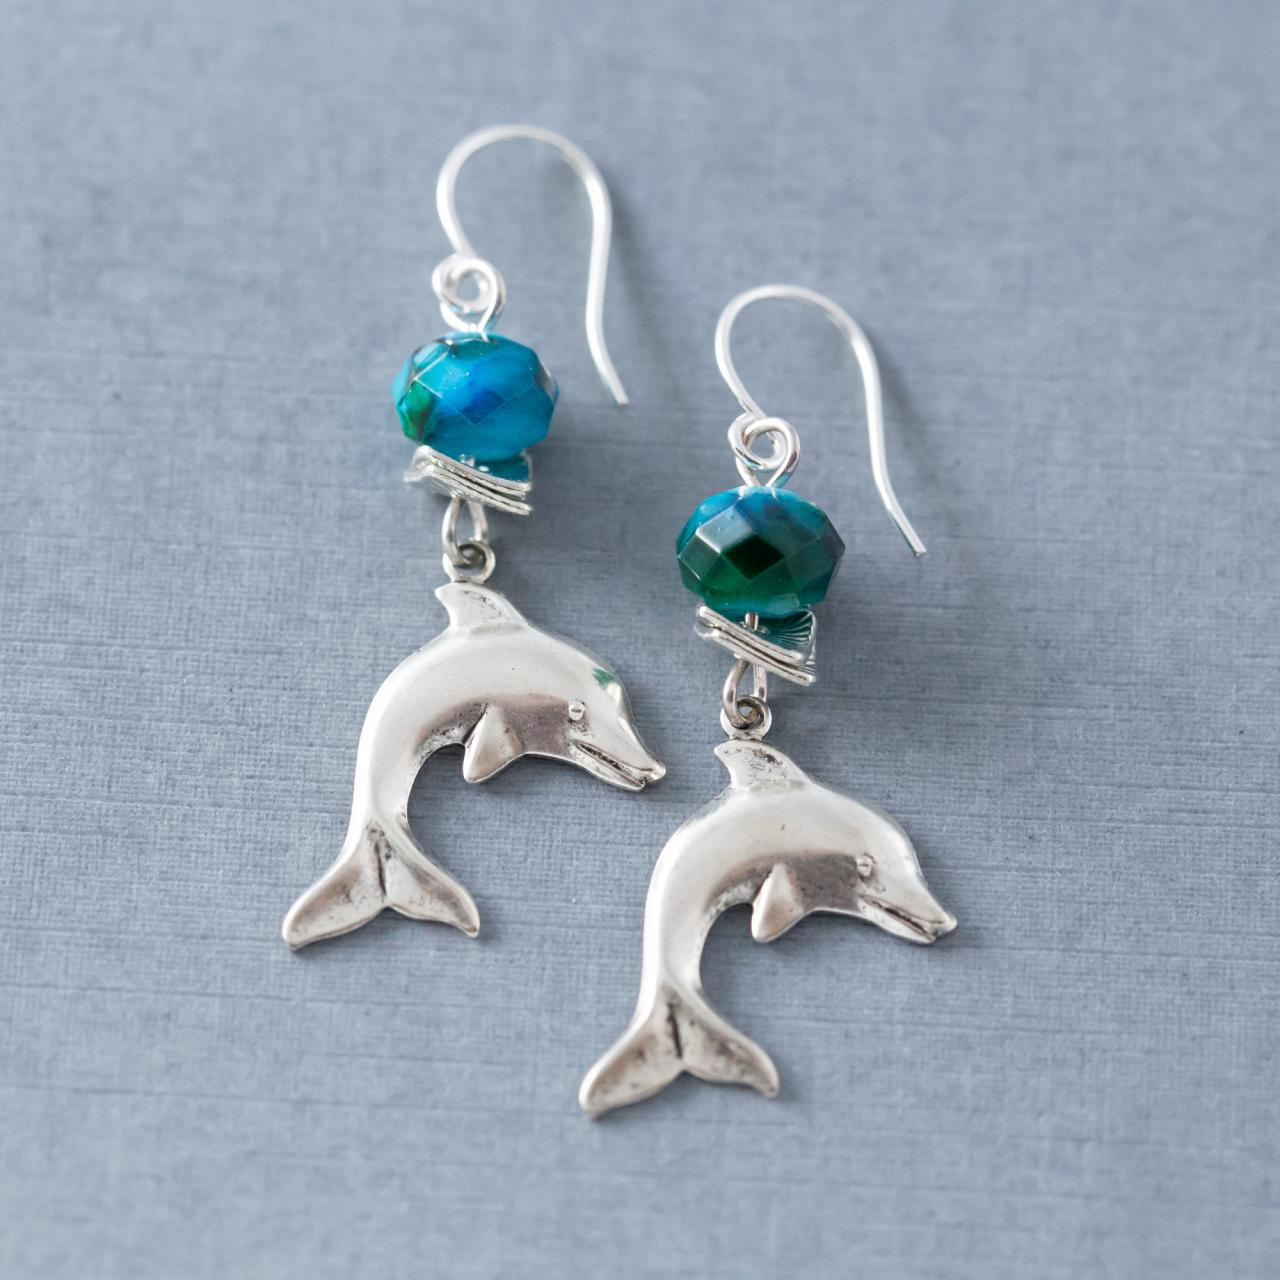 Silver Dolphin Earrings With Blue Green Glass Beads, Dolphin Jewelry, Beach Jewelry, Porpoise Earrings